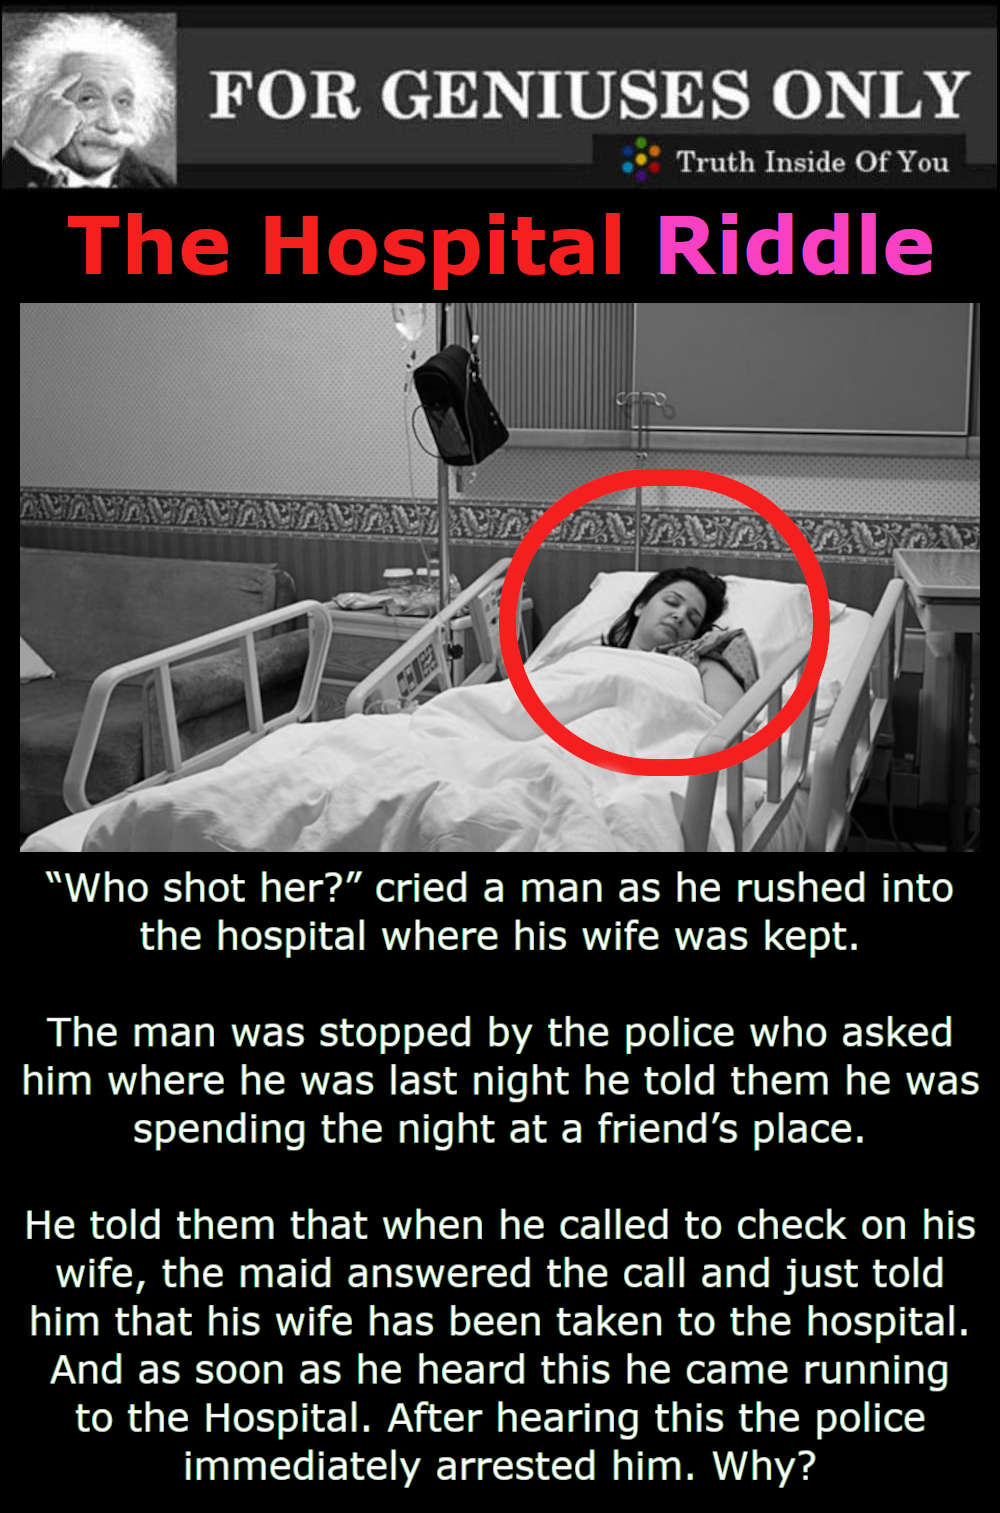 The Hospital Riddle